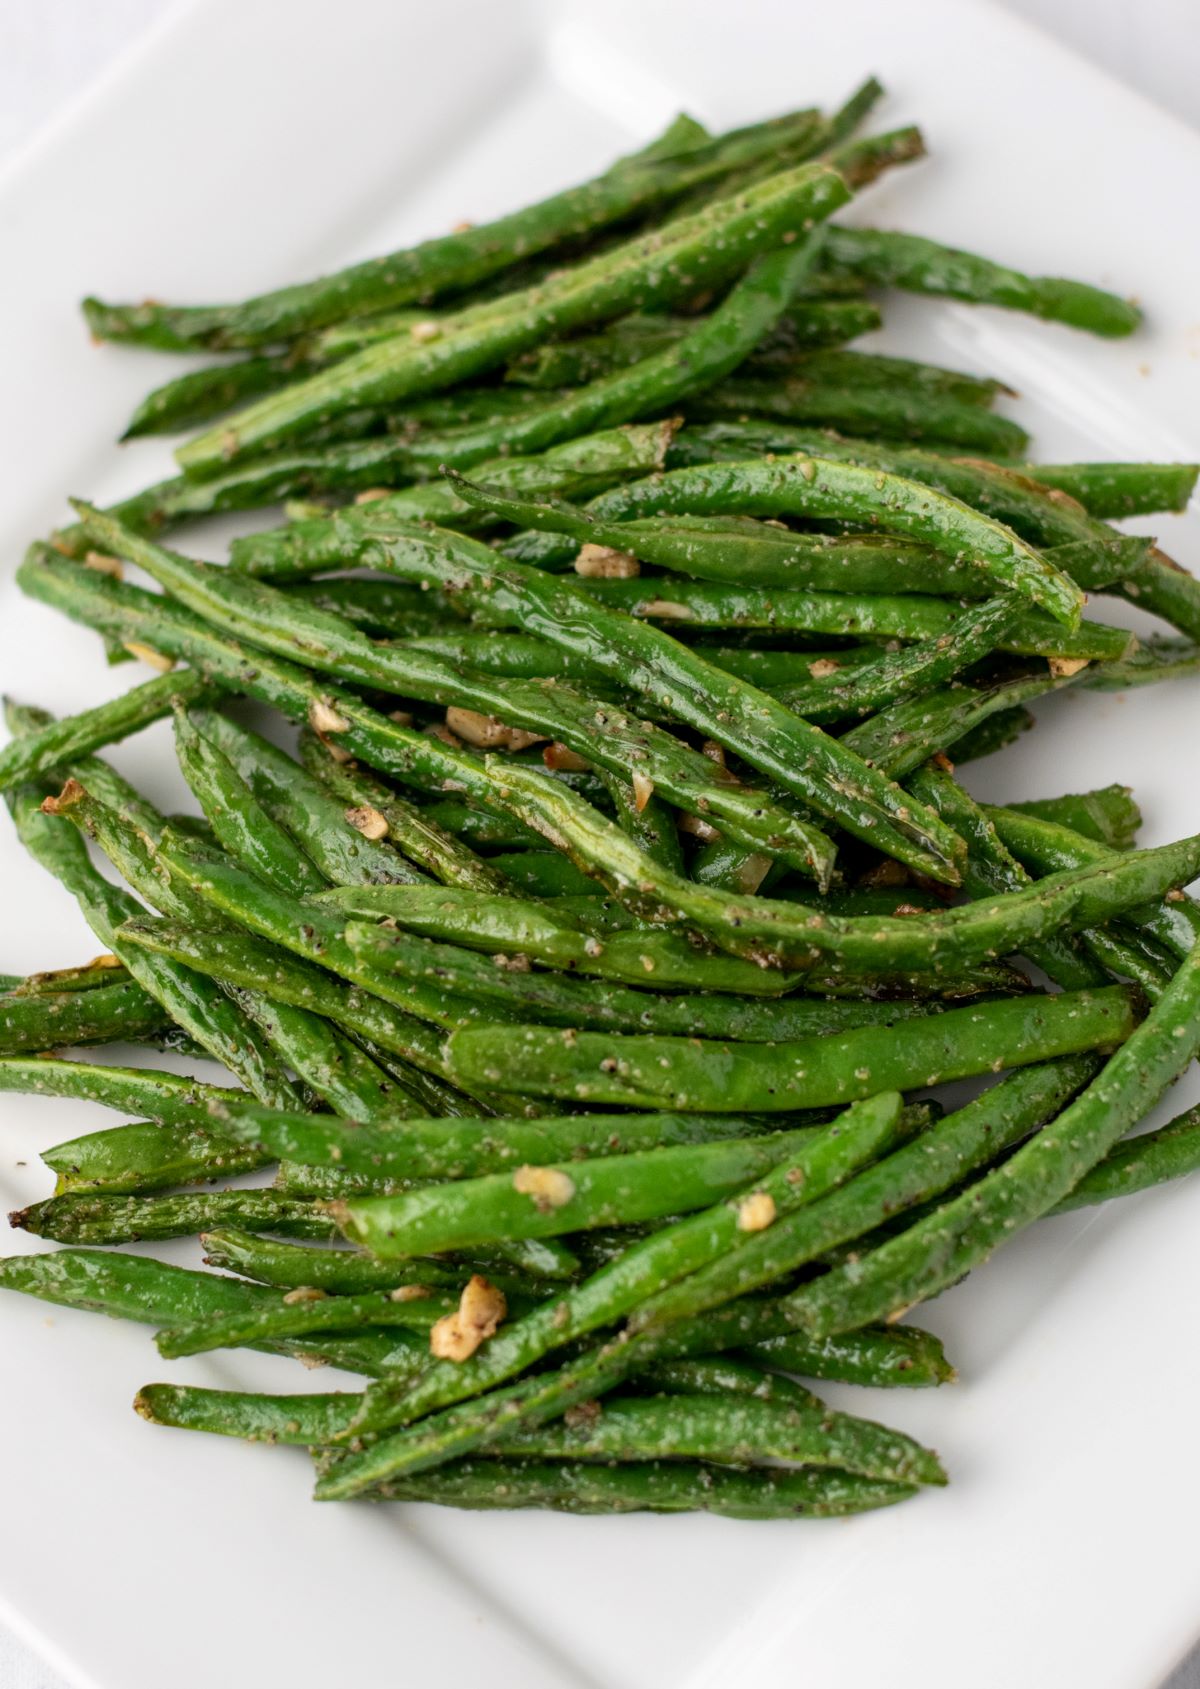 cooked green beans with minced garlic on white plate.